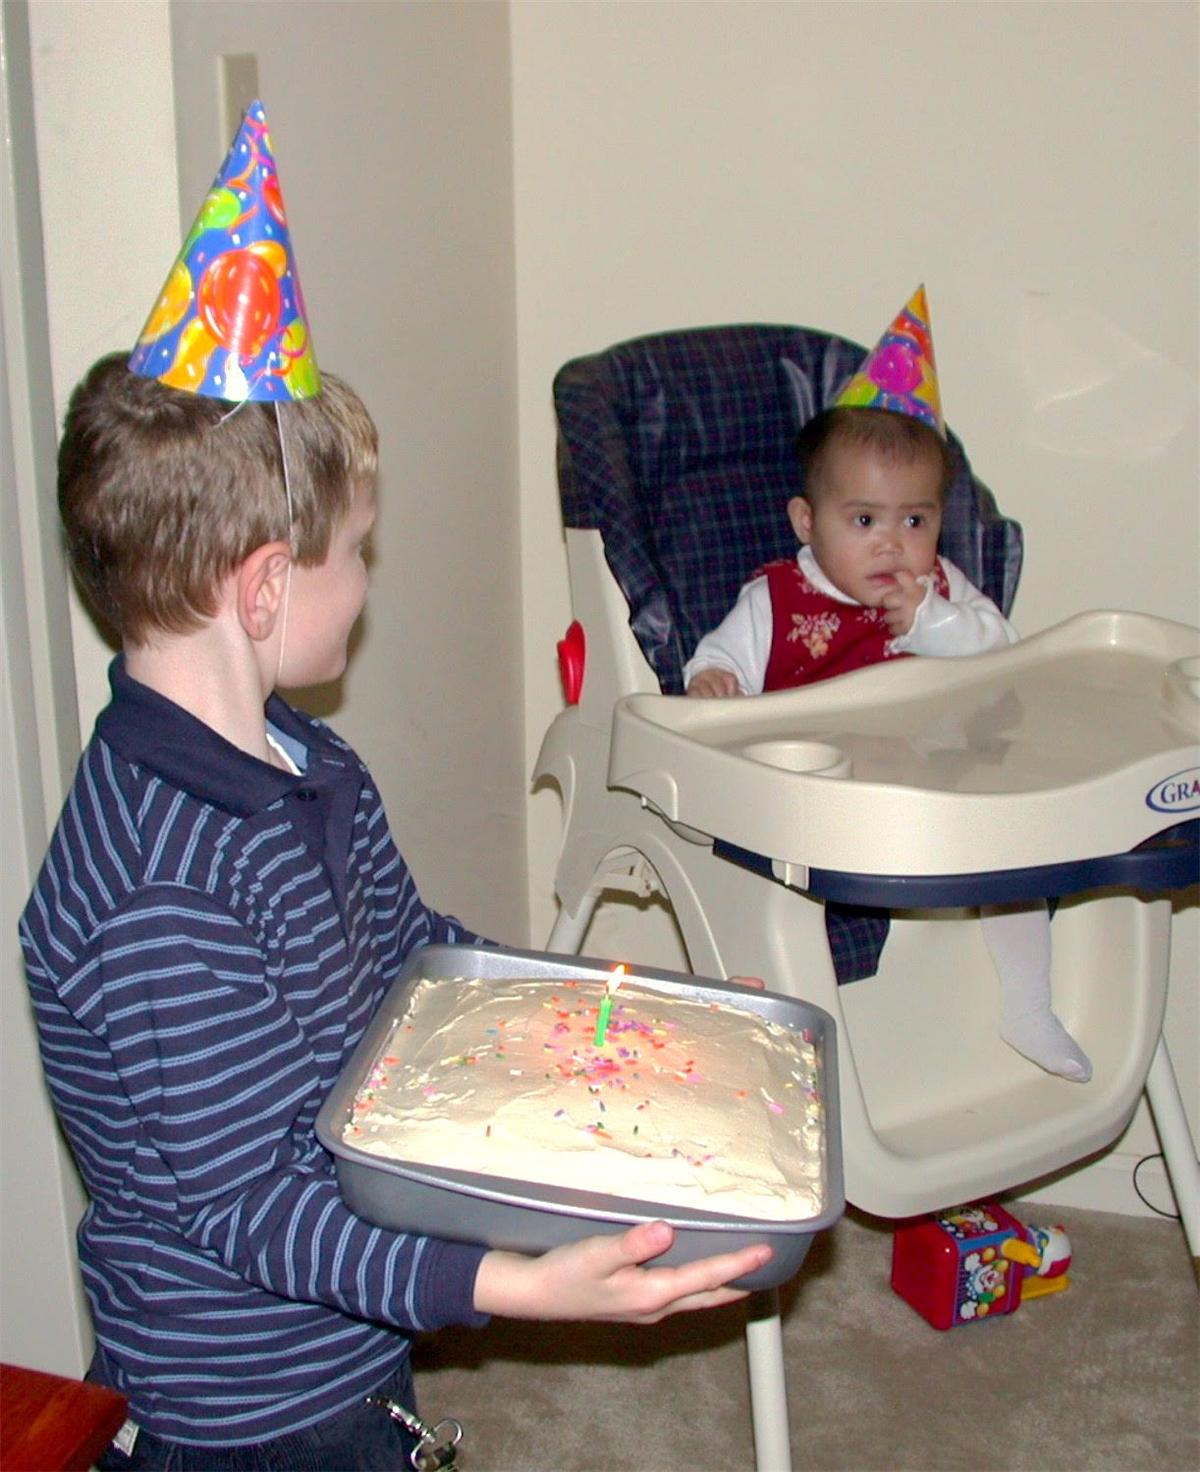 Ayden's 1st birthday, pictured with her older brother, Maclean. (Courtesy ofAyden Lincoln)